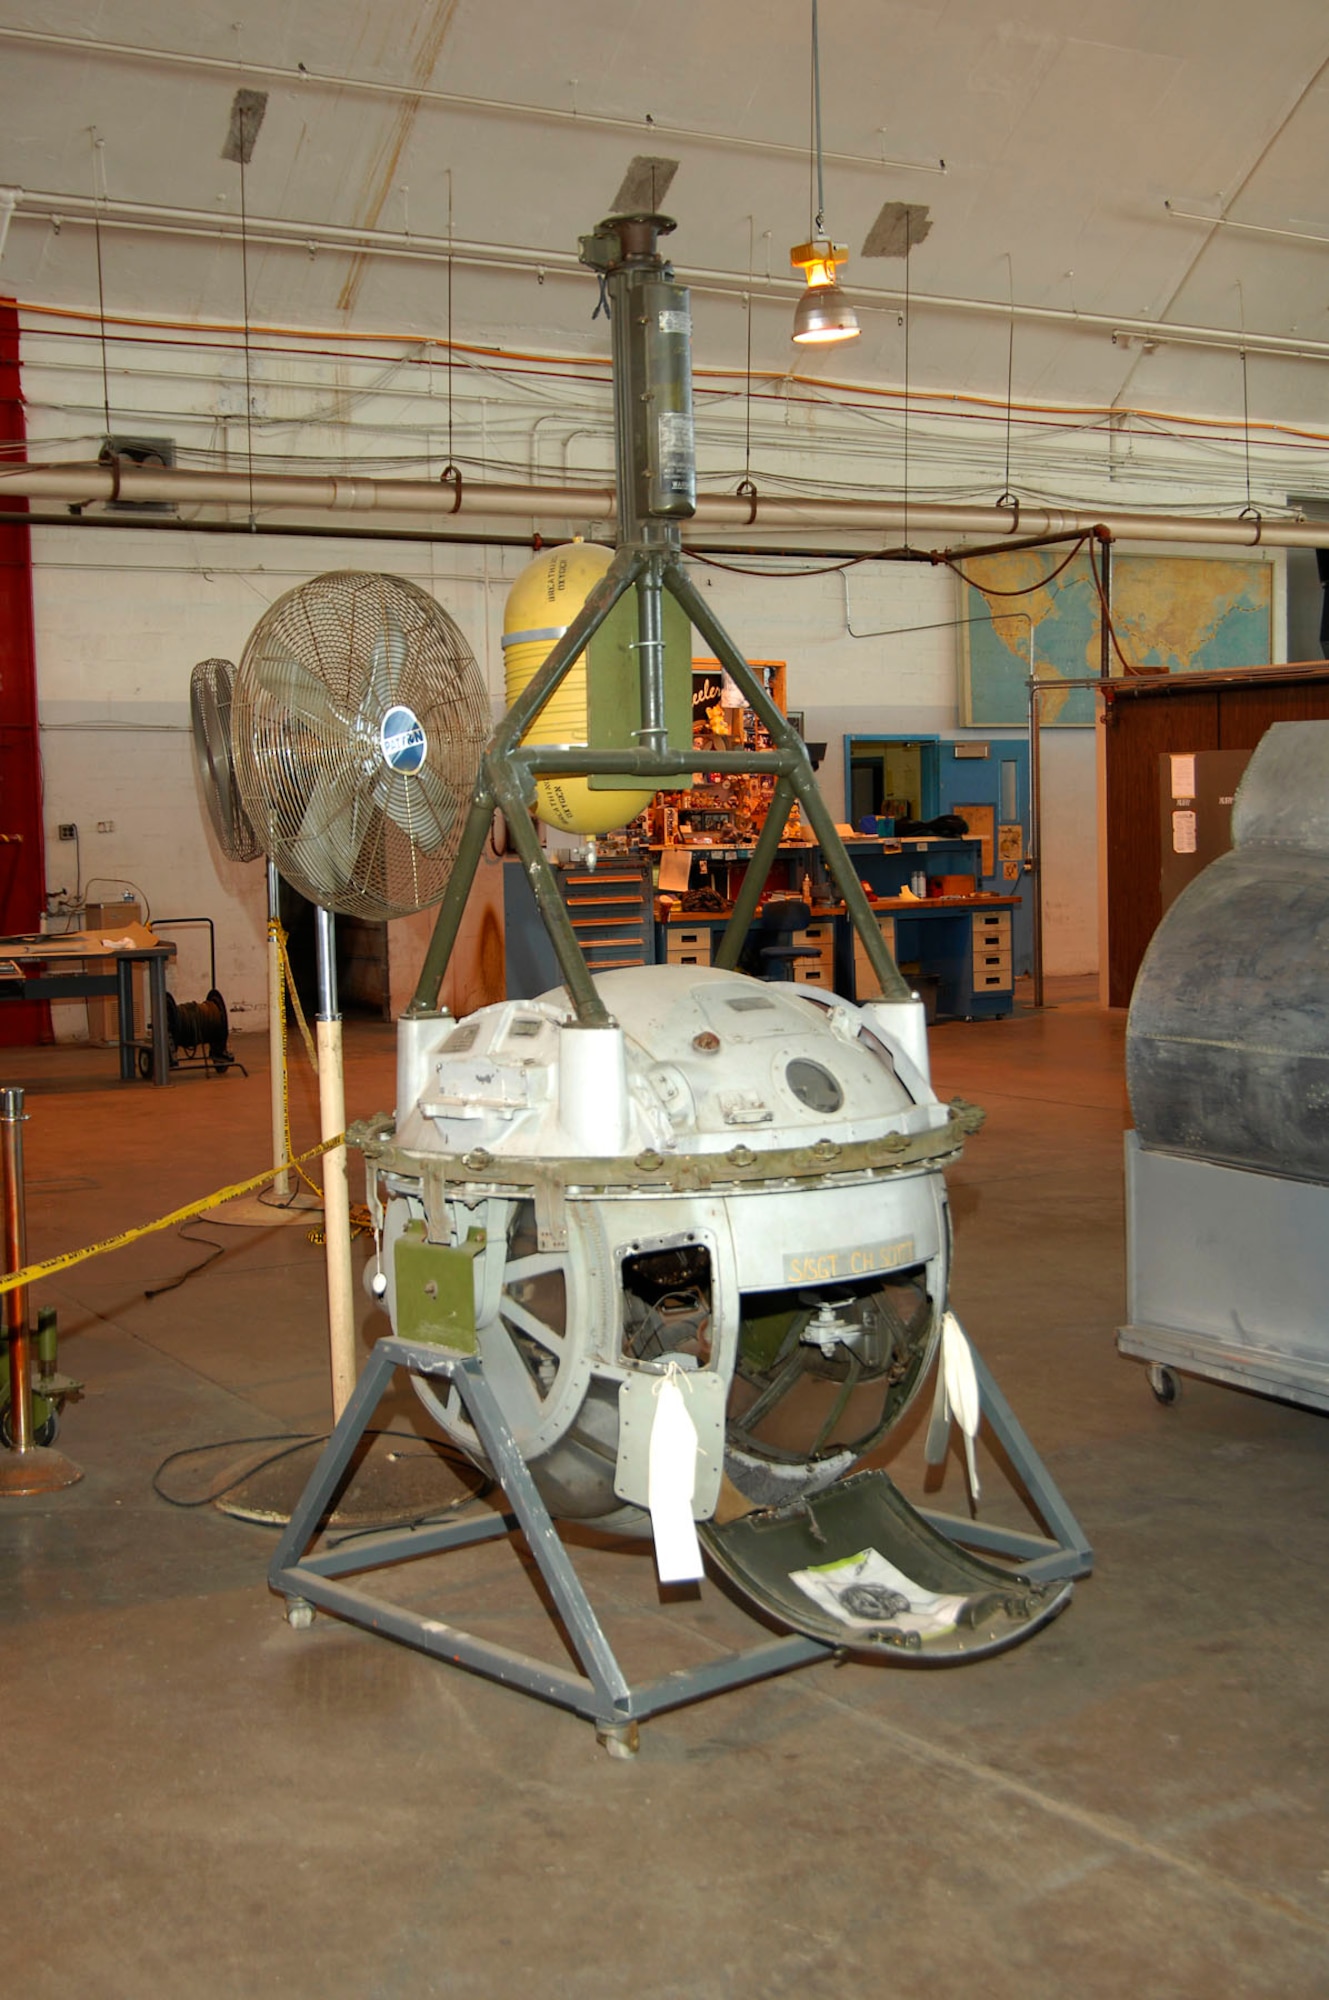 DAYTON, Ohio (02/2007) - Ball turret of the B-17F "Memphis Belle" undergoing restoration at the National Museum of the U.S. Air Force. (U.S. Air Force photo by Ben Strasser)